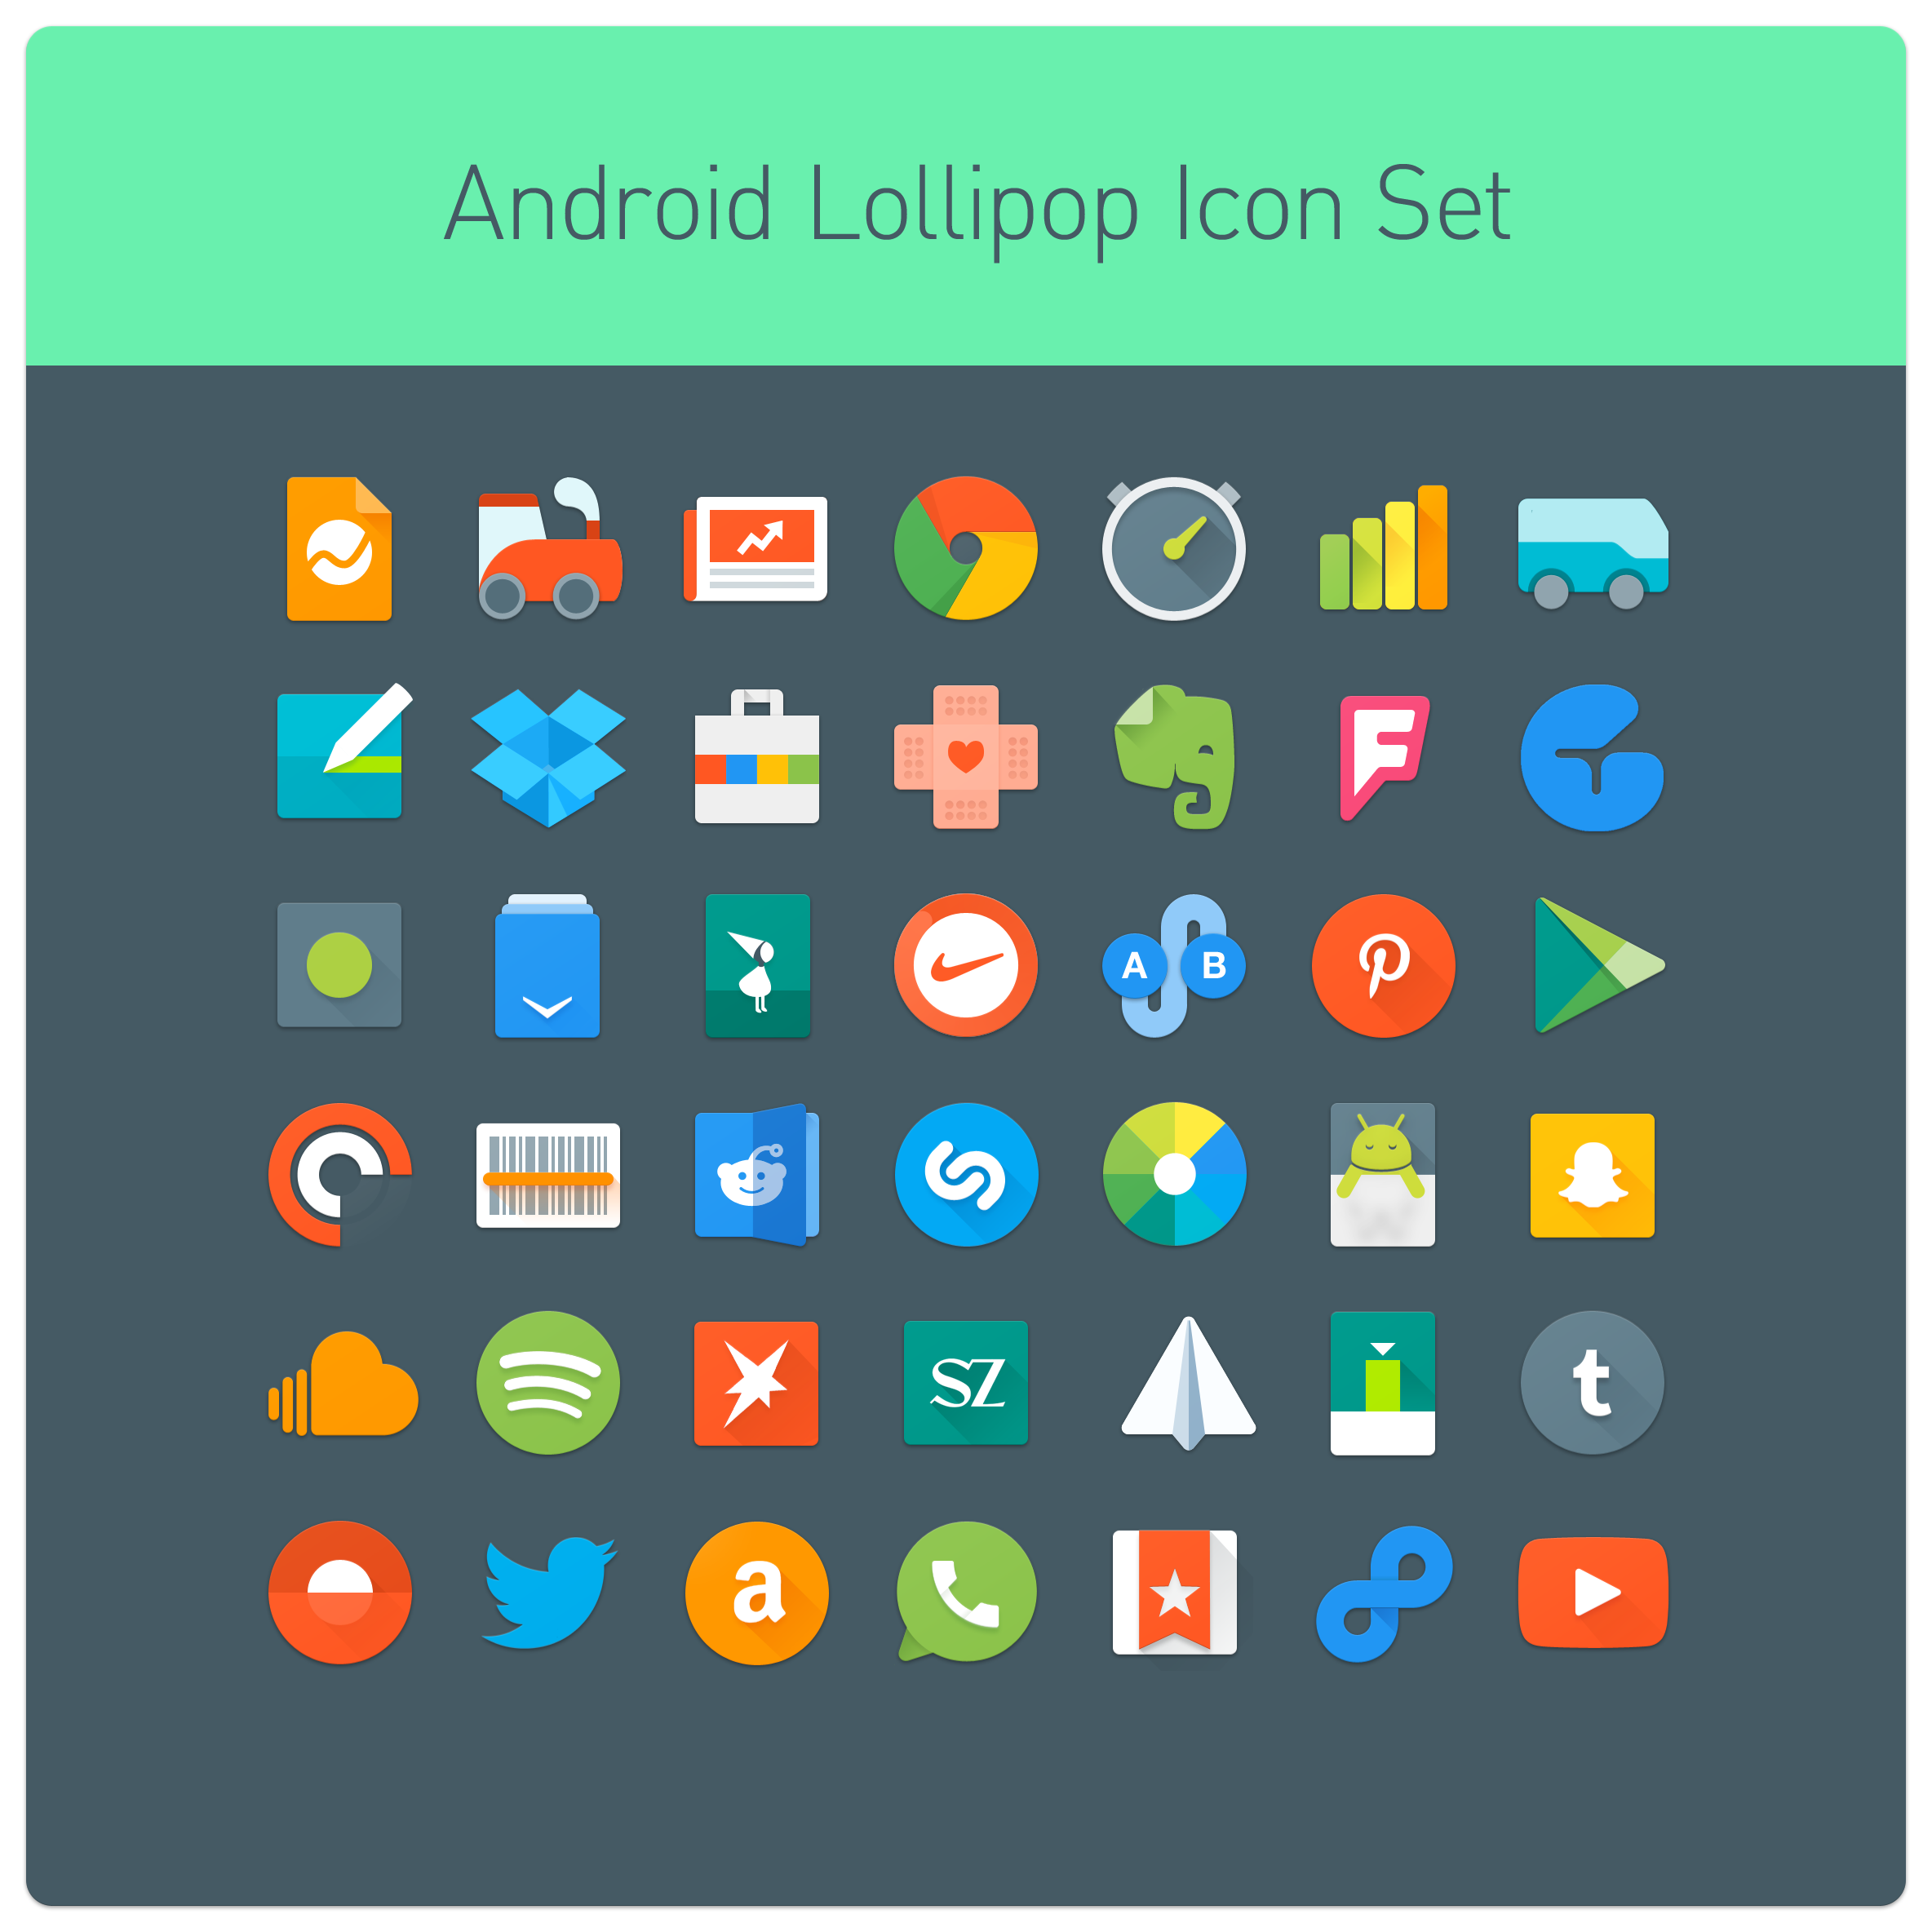 Icon Packs On Android Users DeviantArt